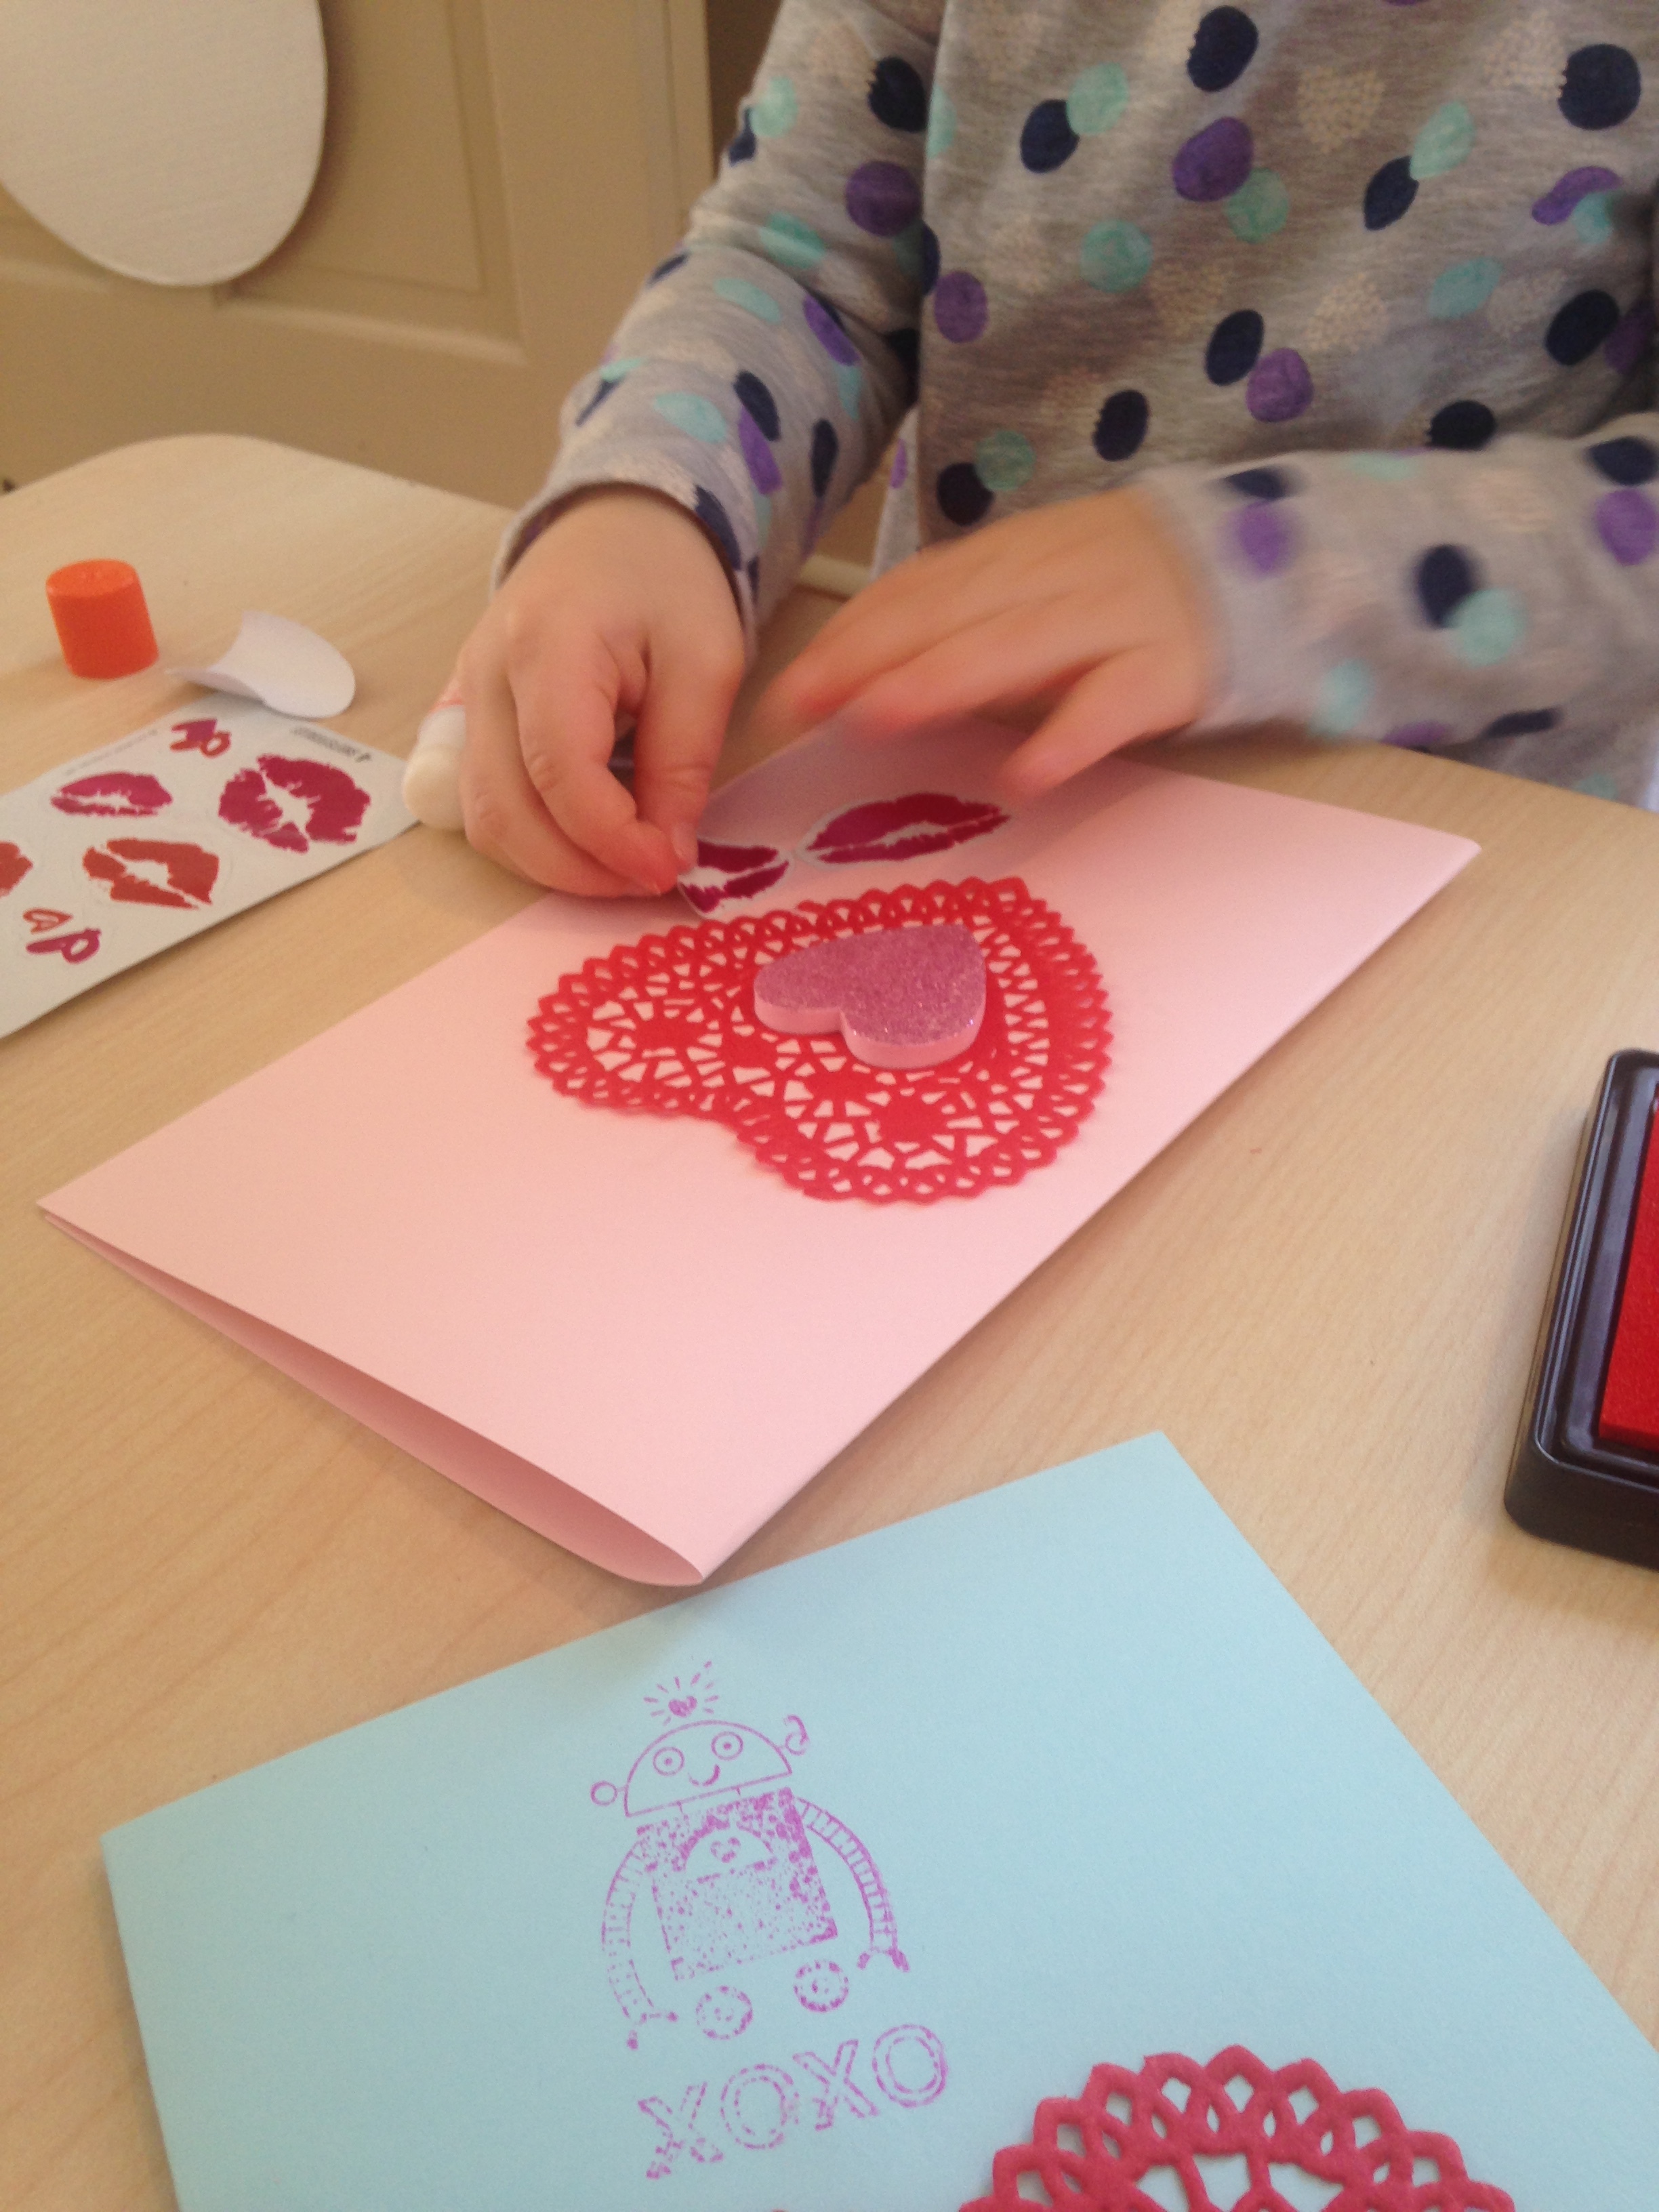 Creating Valentine's Day cards!